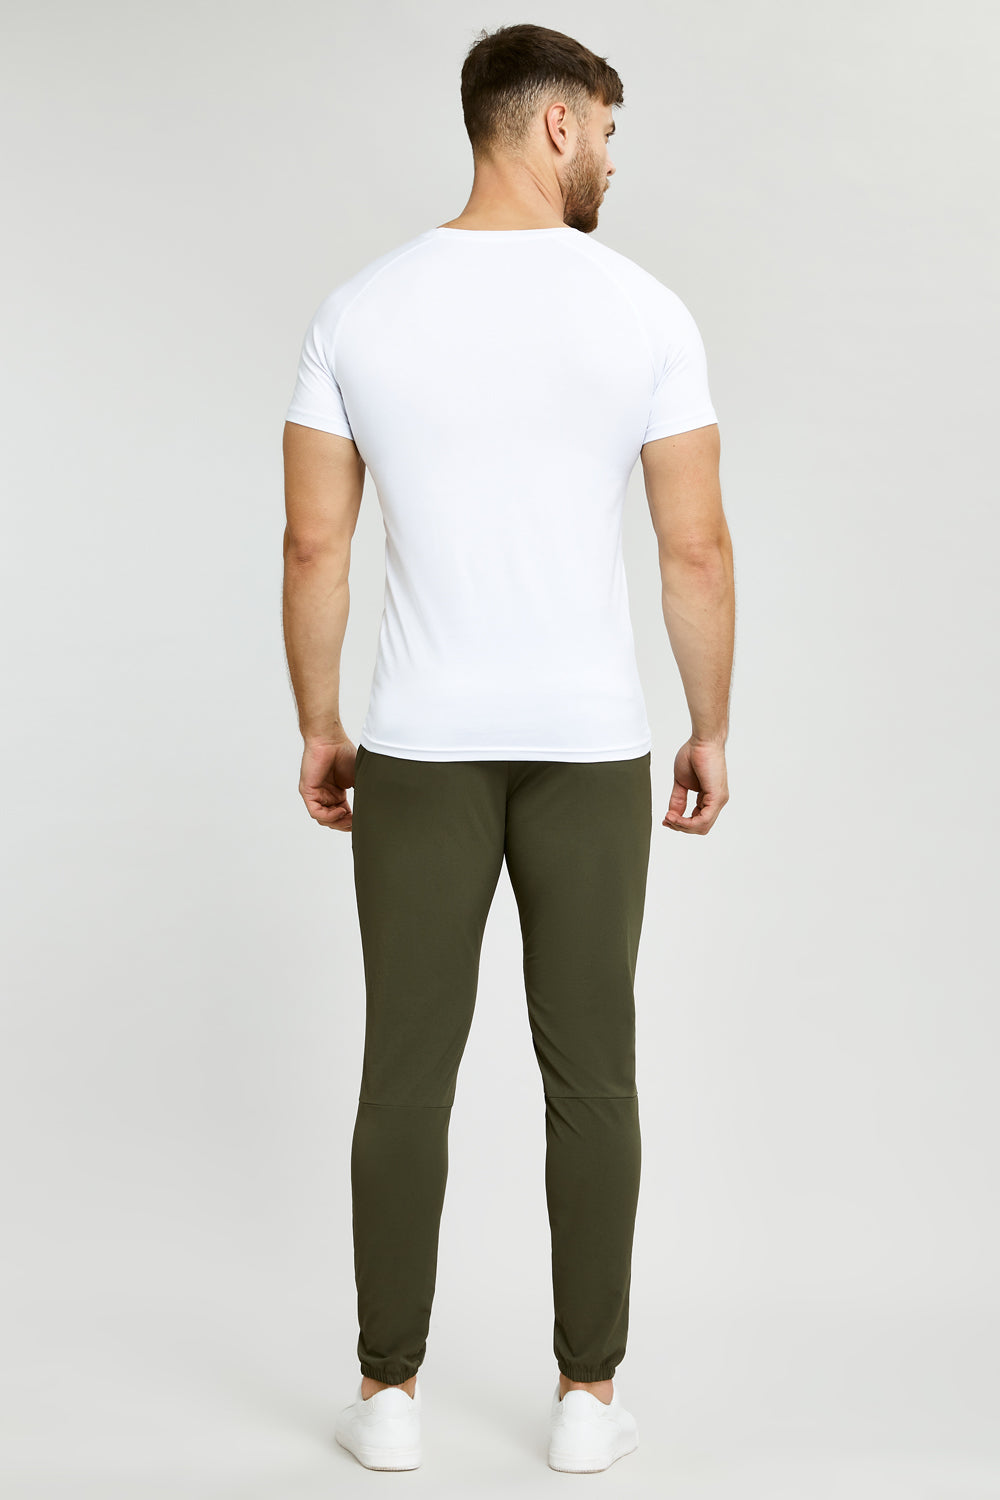 Buy Urbano Fashion Men Olive Green Cotton Slim Fit Casual Chinos Trousers  Stretch online